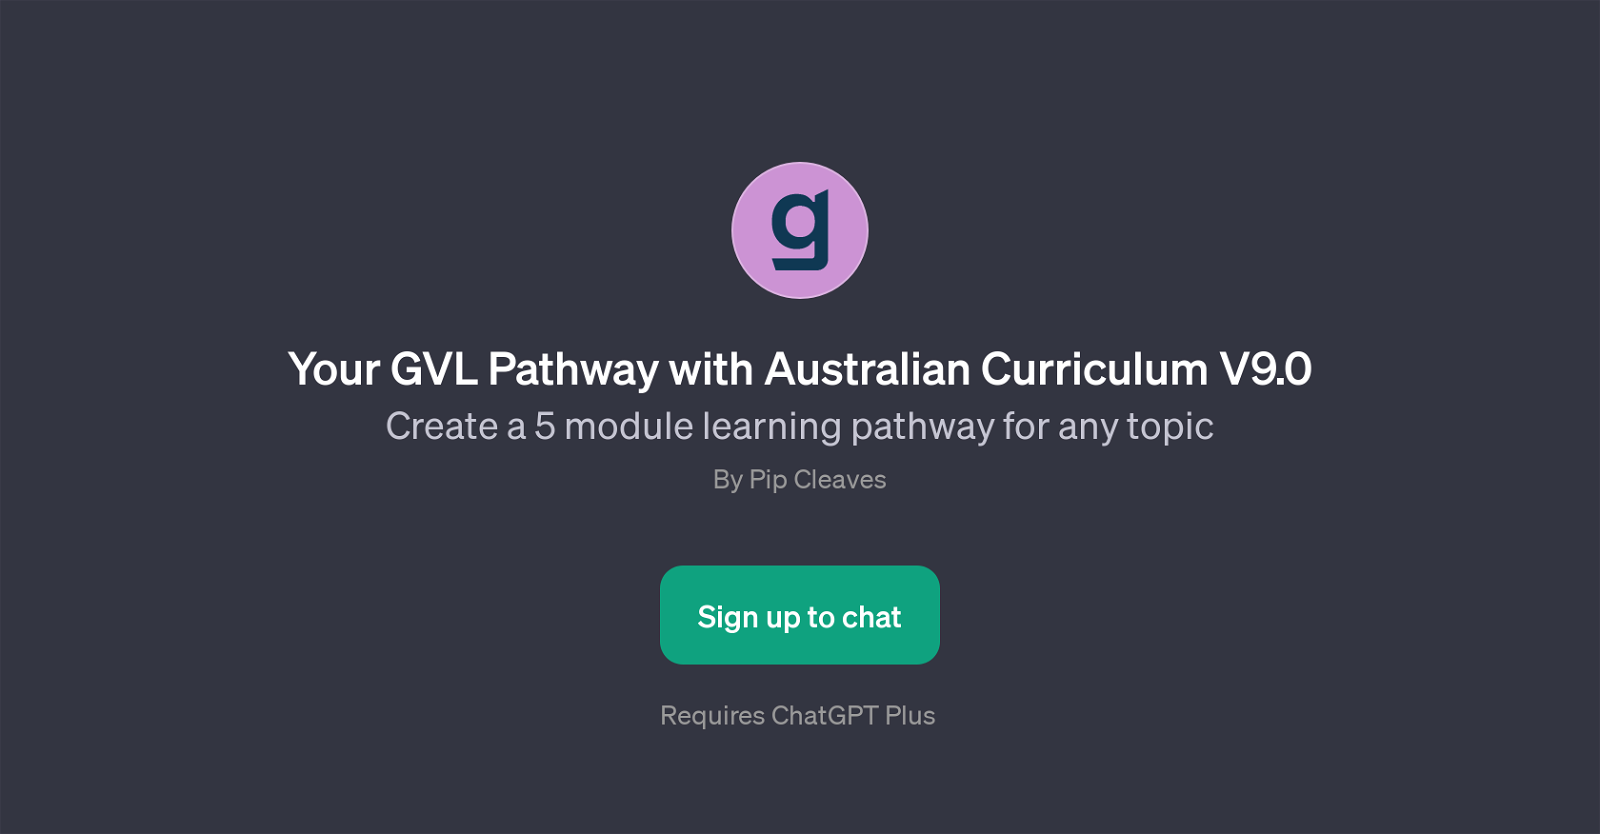 Your GVL Pathway with Australian Curriculum V9.0 website